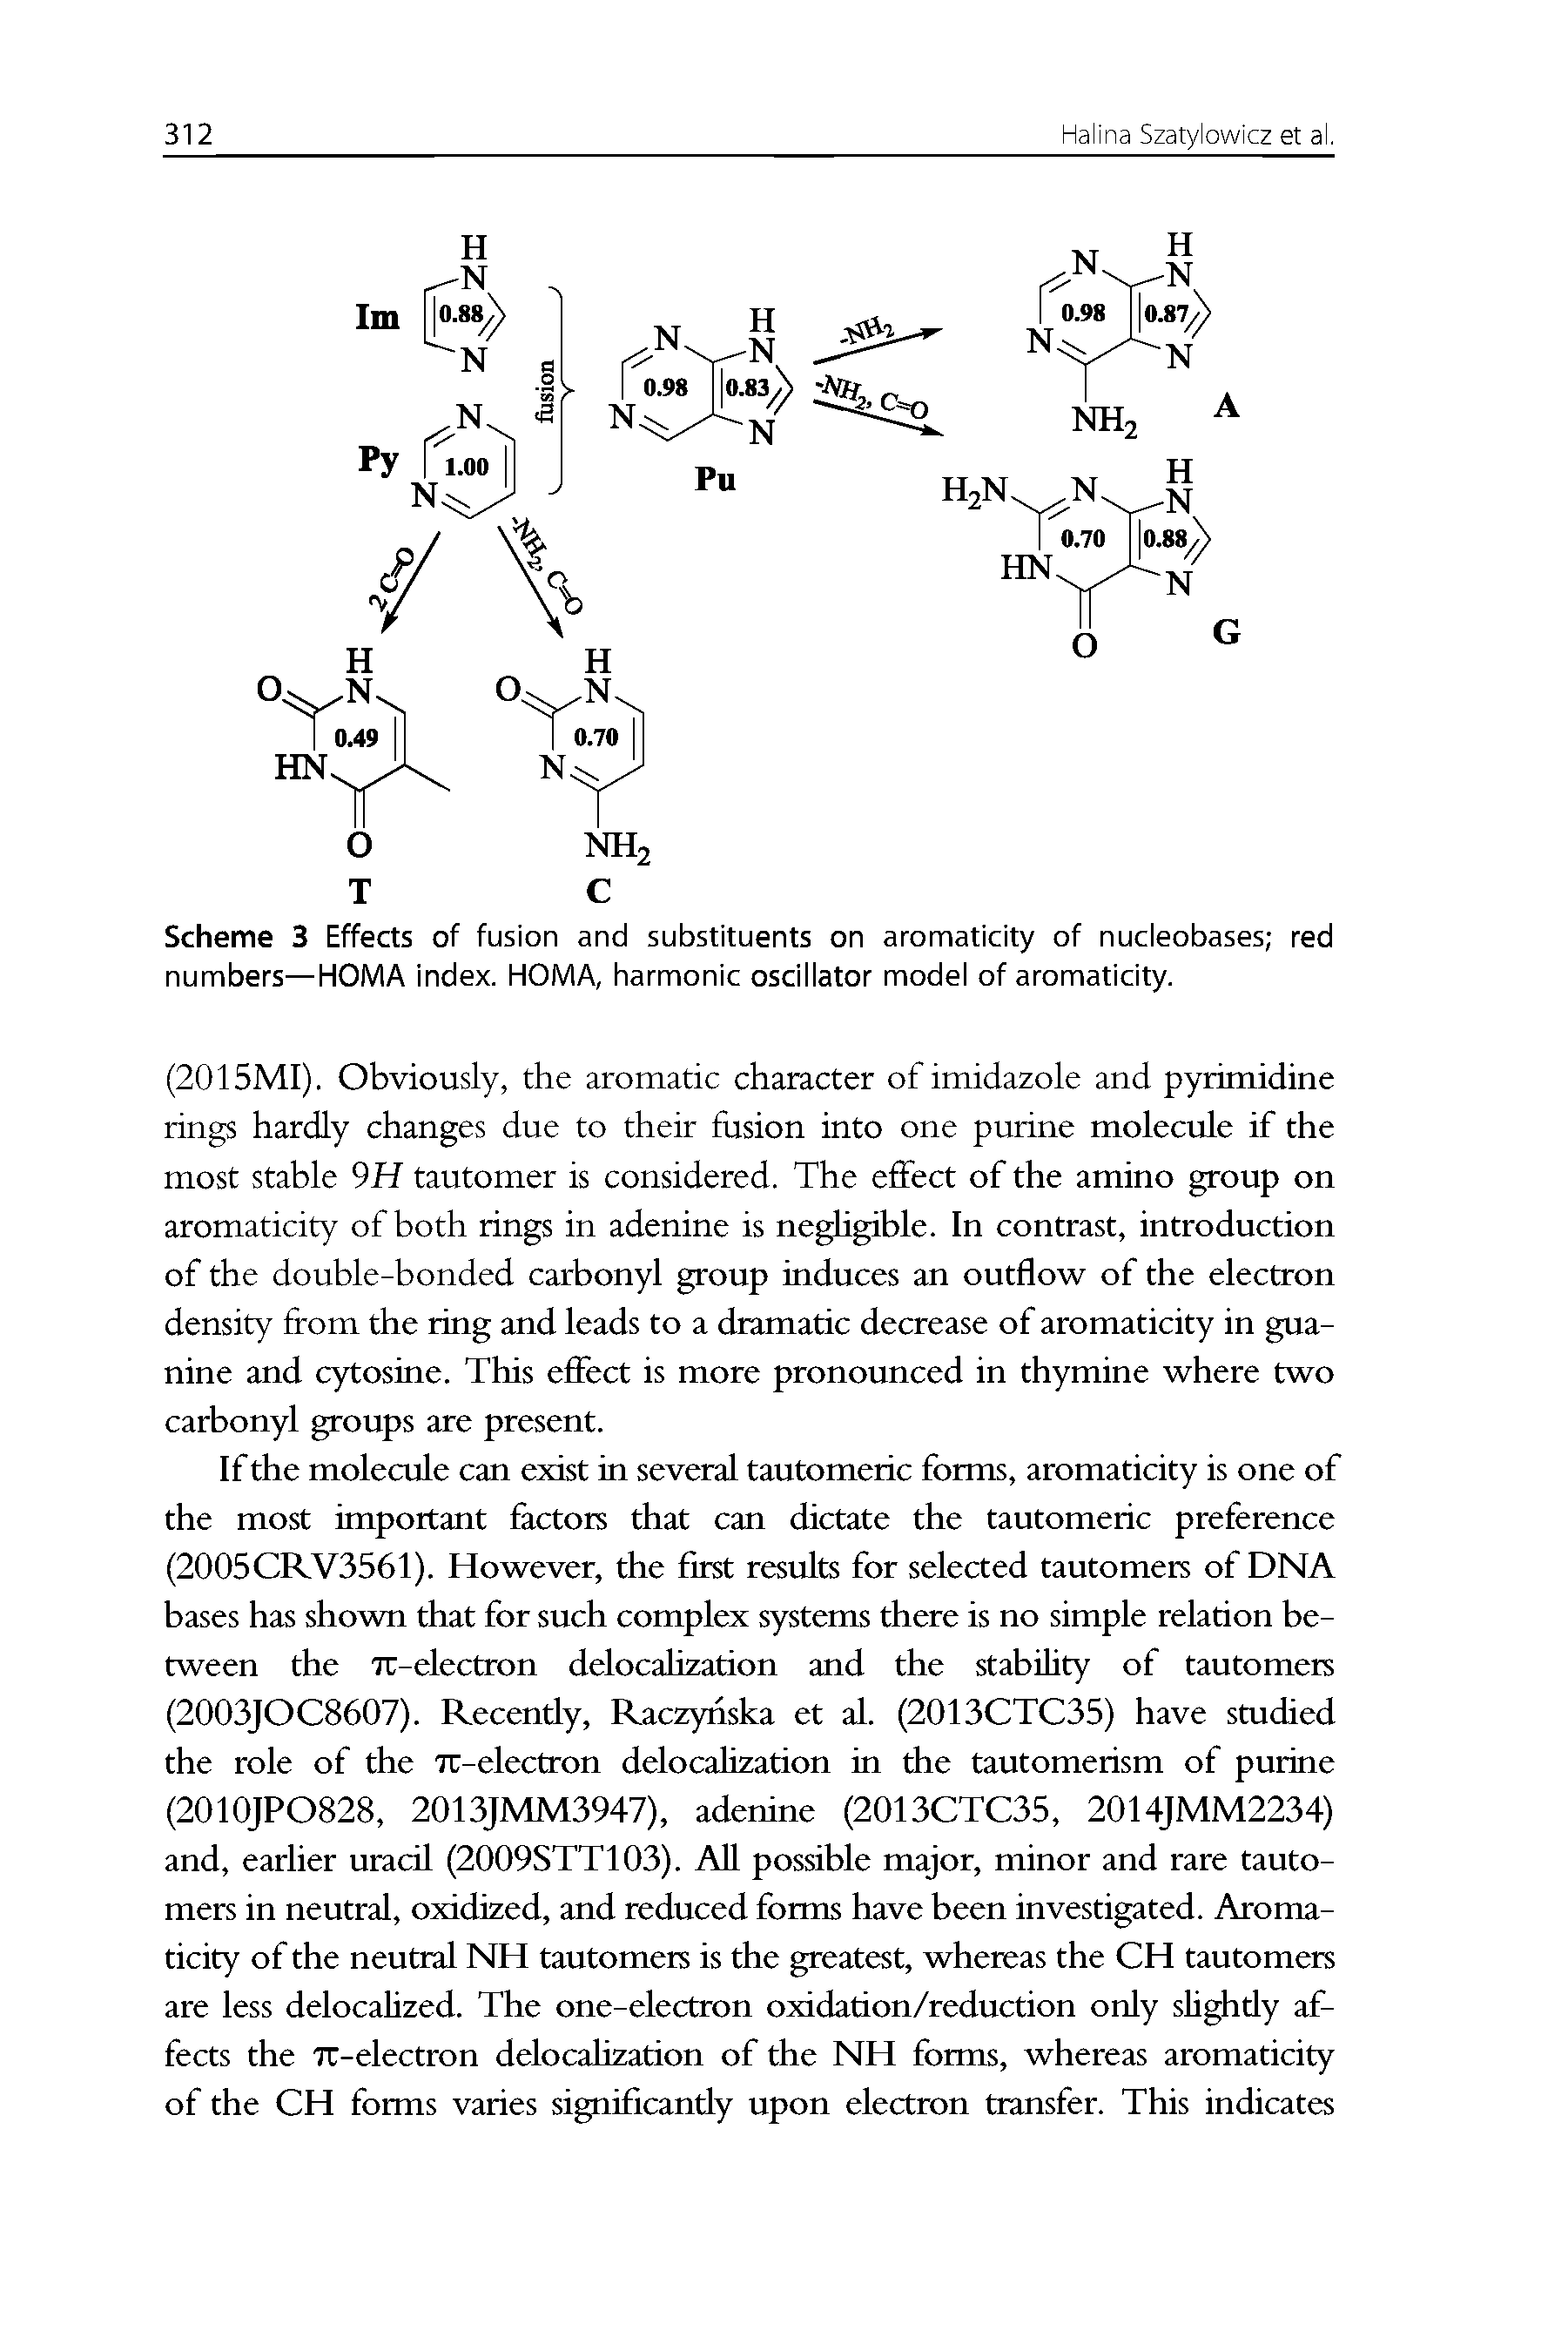 Scheme 3 Effects of fusion and substituents on aromaticity of nucleobases red numbers—HOMA index. HOMA, harmonic oscillator model of aromaticity.